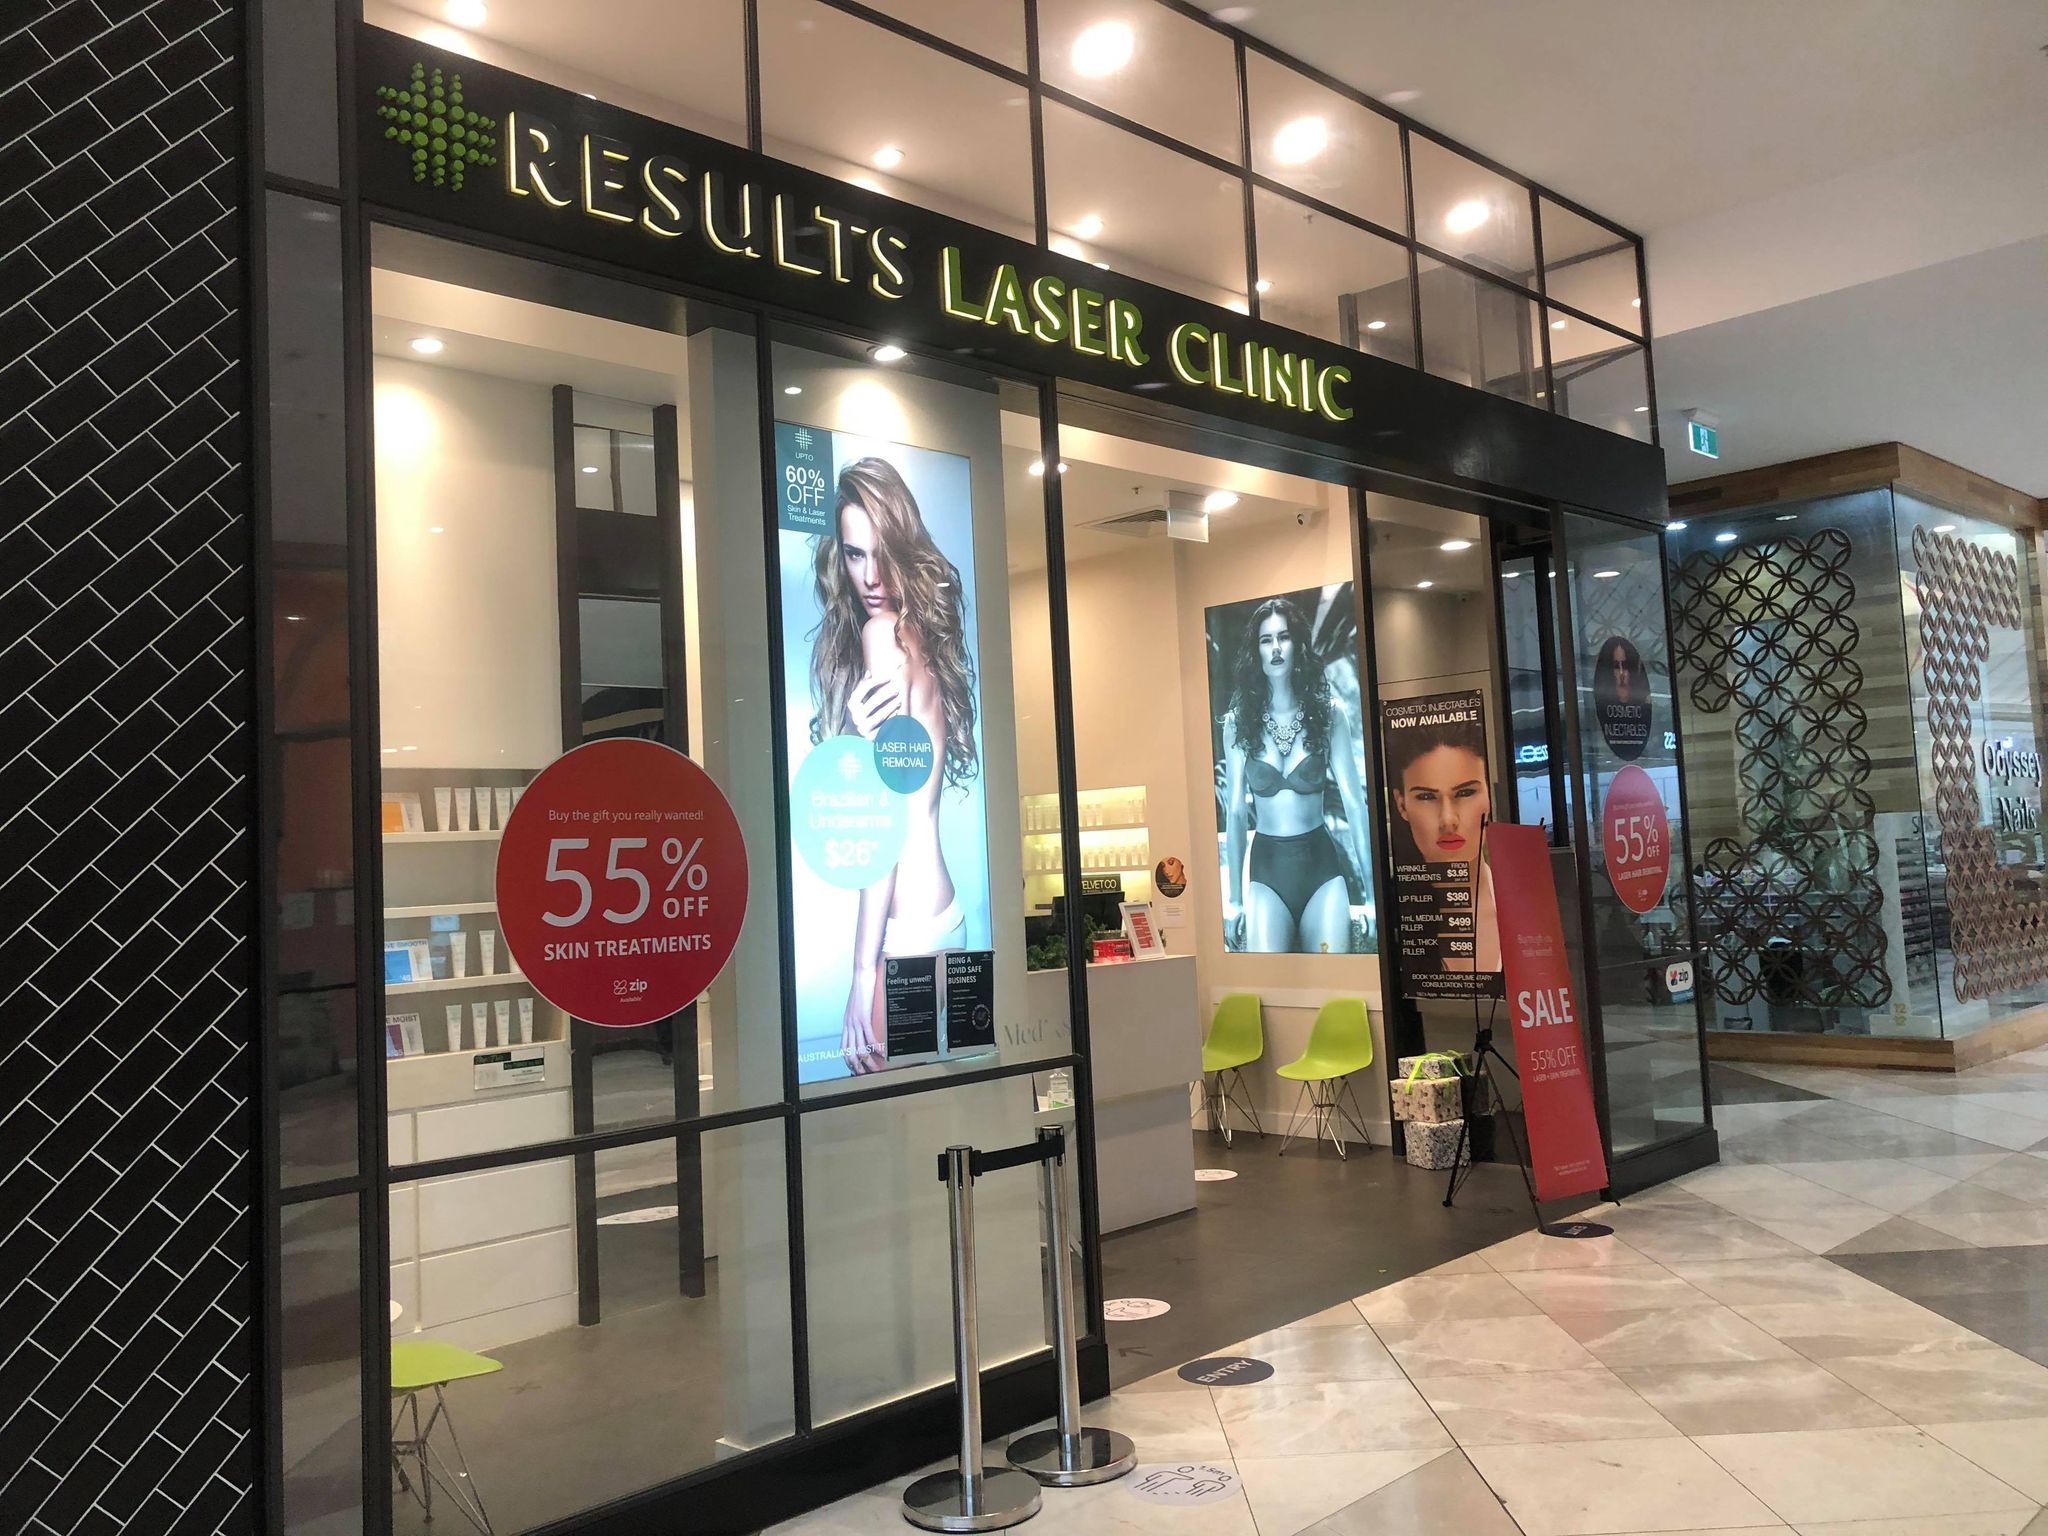 pacific werribee december 2020 results laser clinic